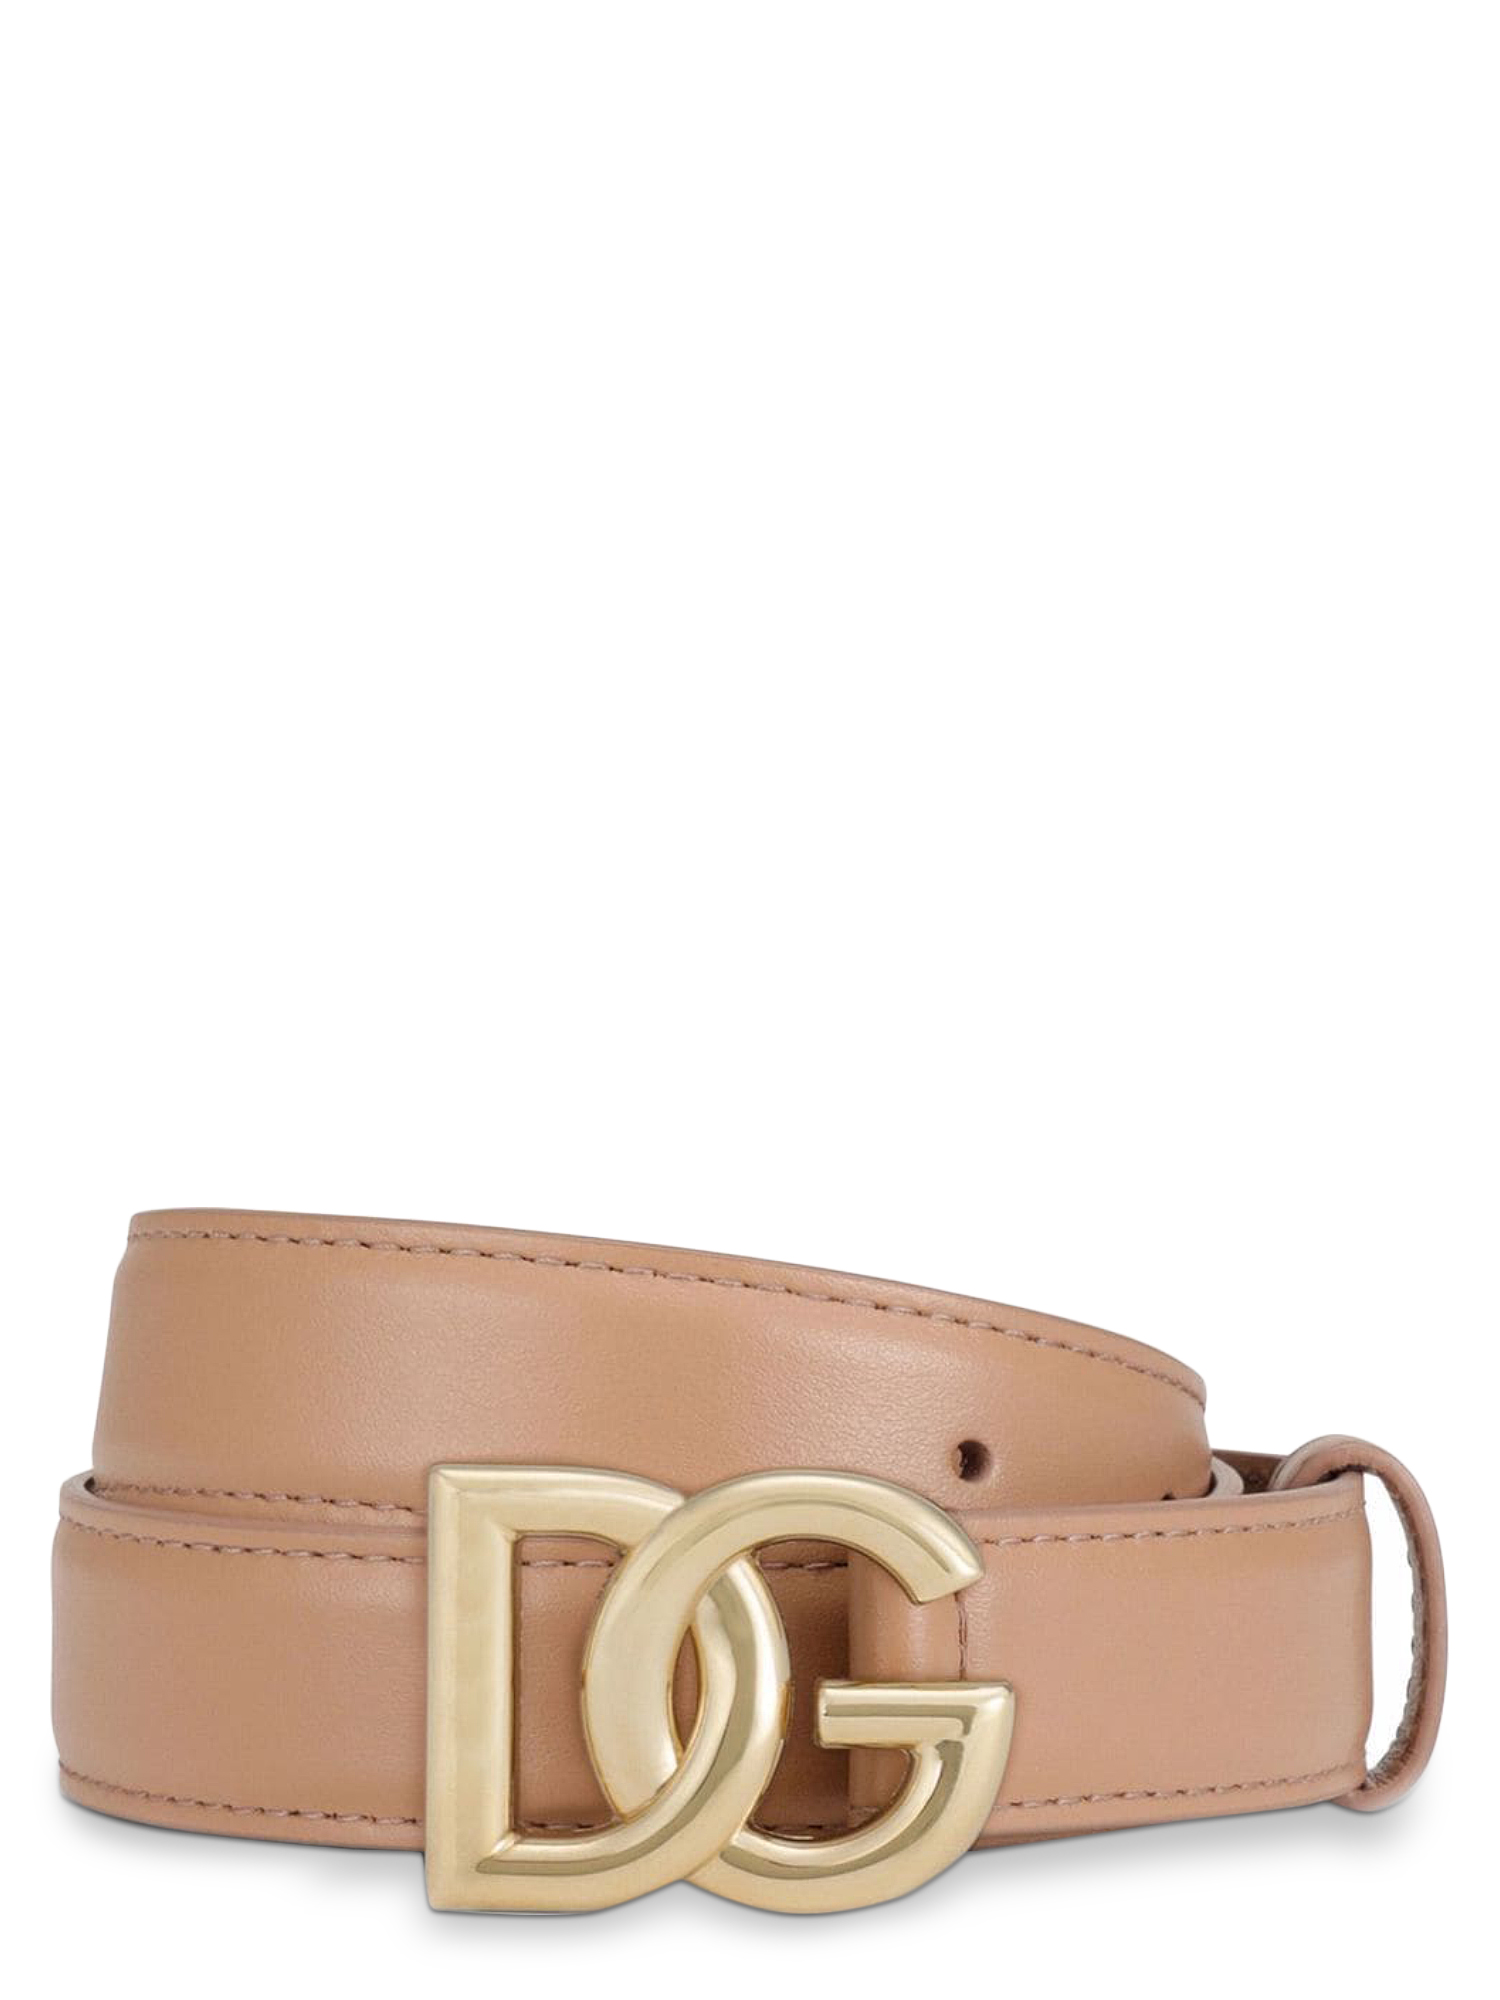 Dolce & Gabbana Belts Pink - Reluxable